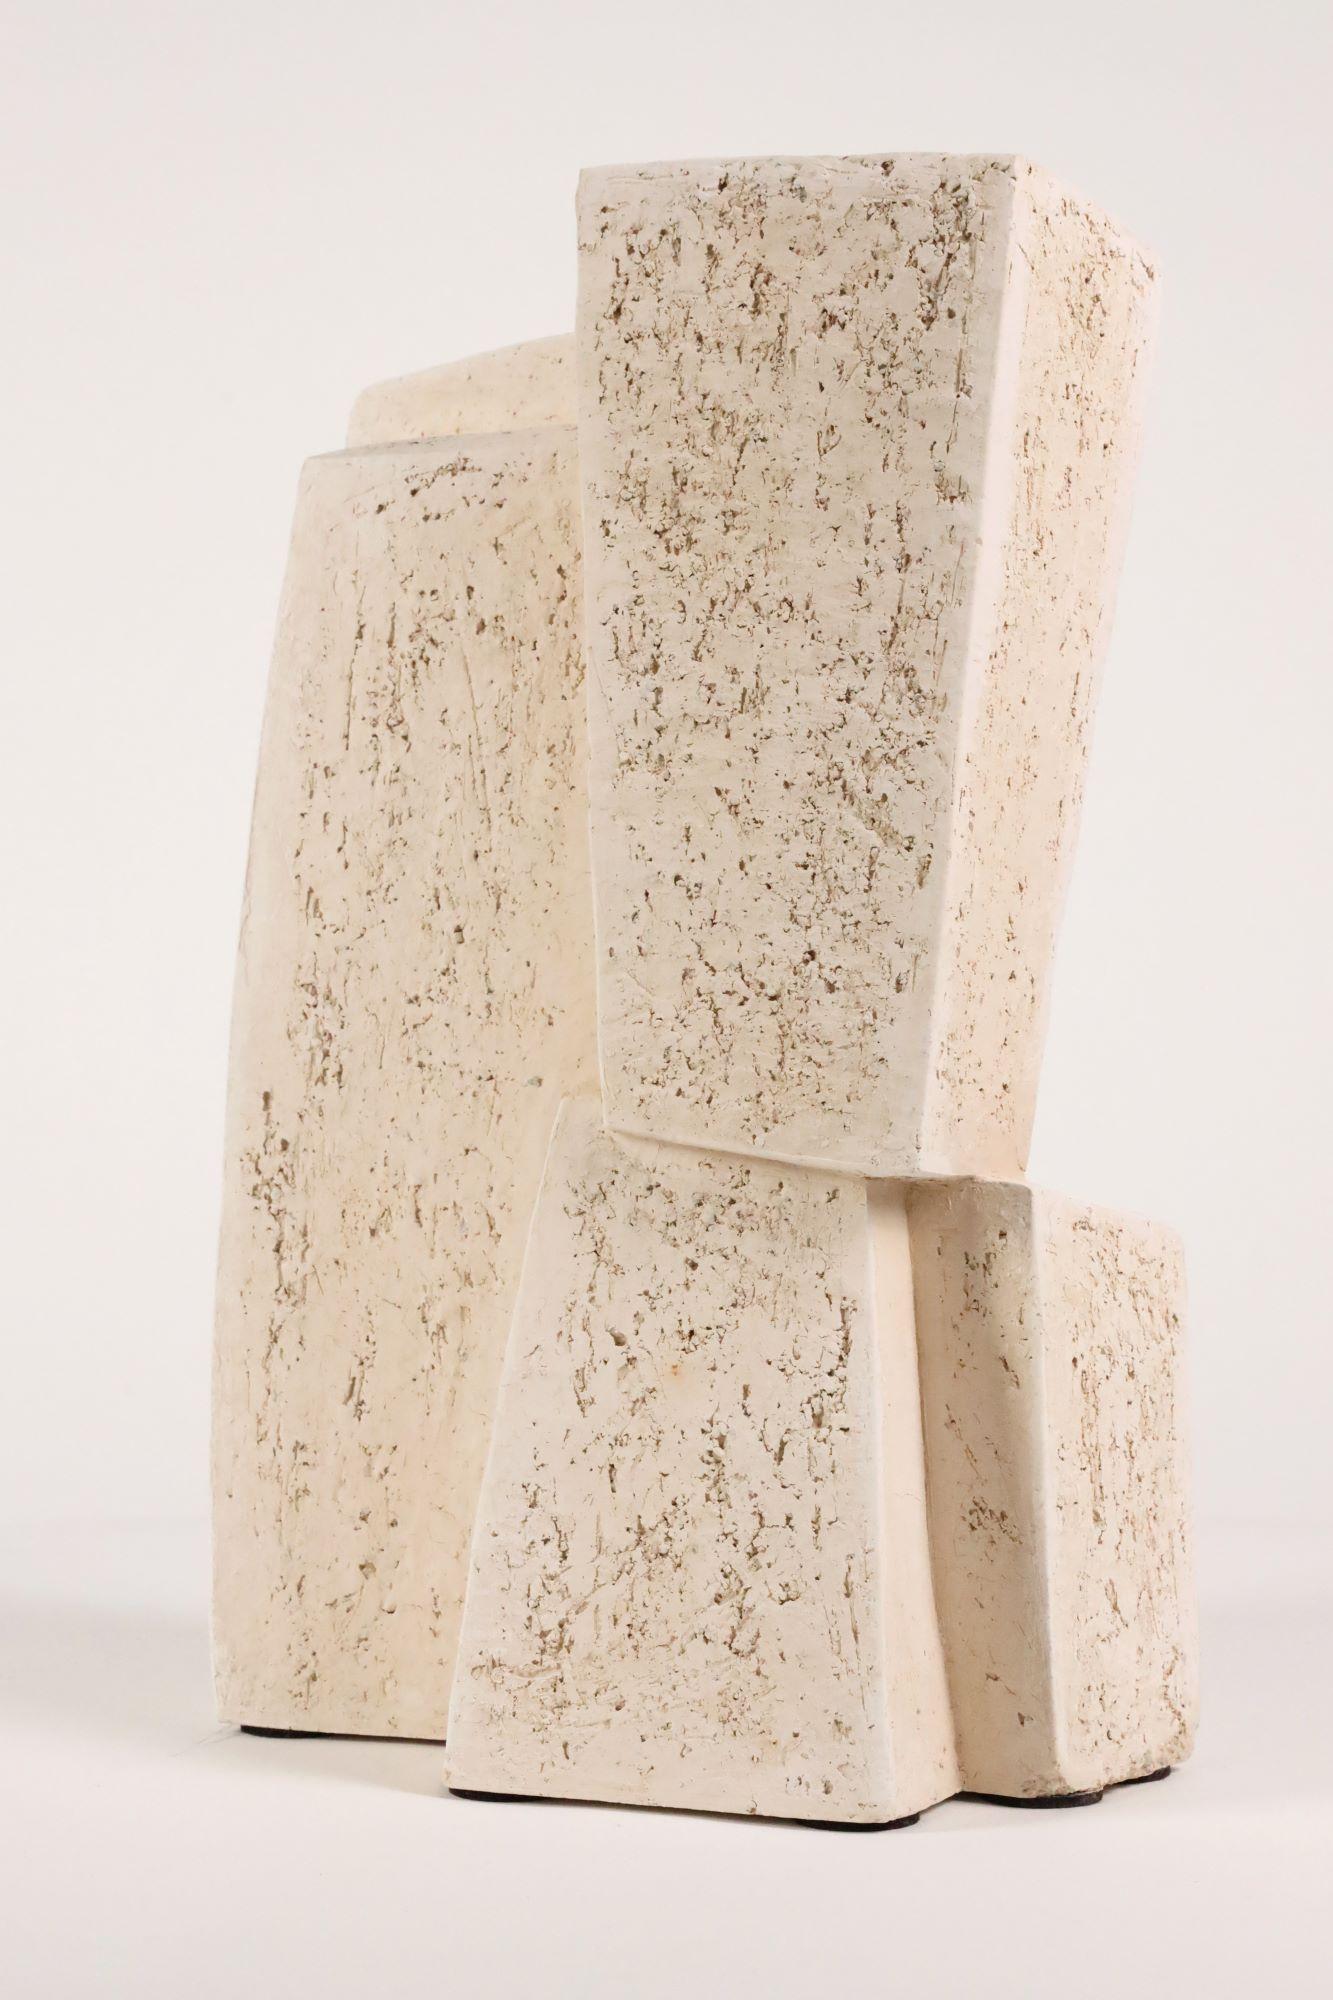 Union V is a unique white terracotta sculpture with chamotte sculpture by contemporary artist Delphine Brabant, dimensions are 45 × 27 × 19 cm (17.7 × 10.6 × 7.5 in). 
The sculpture is signed and comes with a certificate of authenticity.

As she